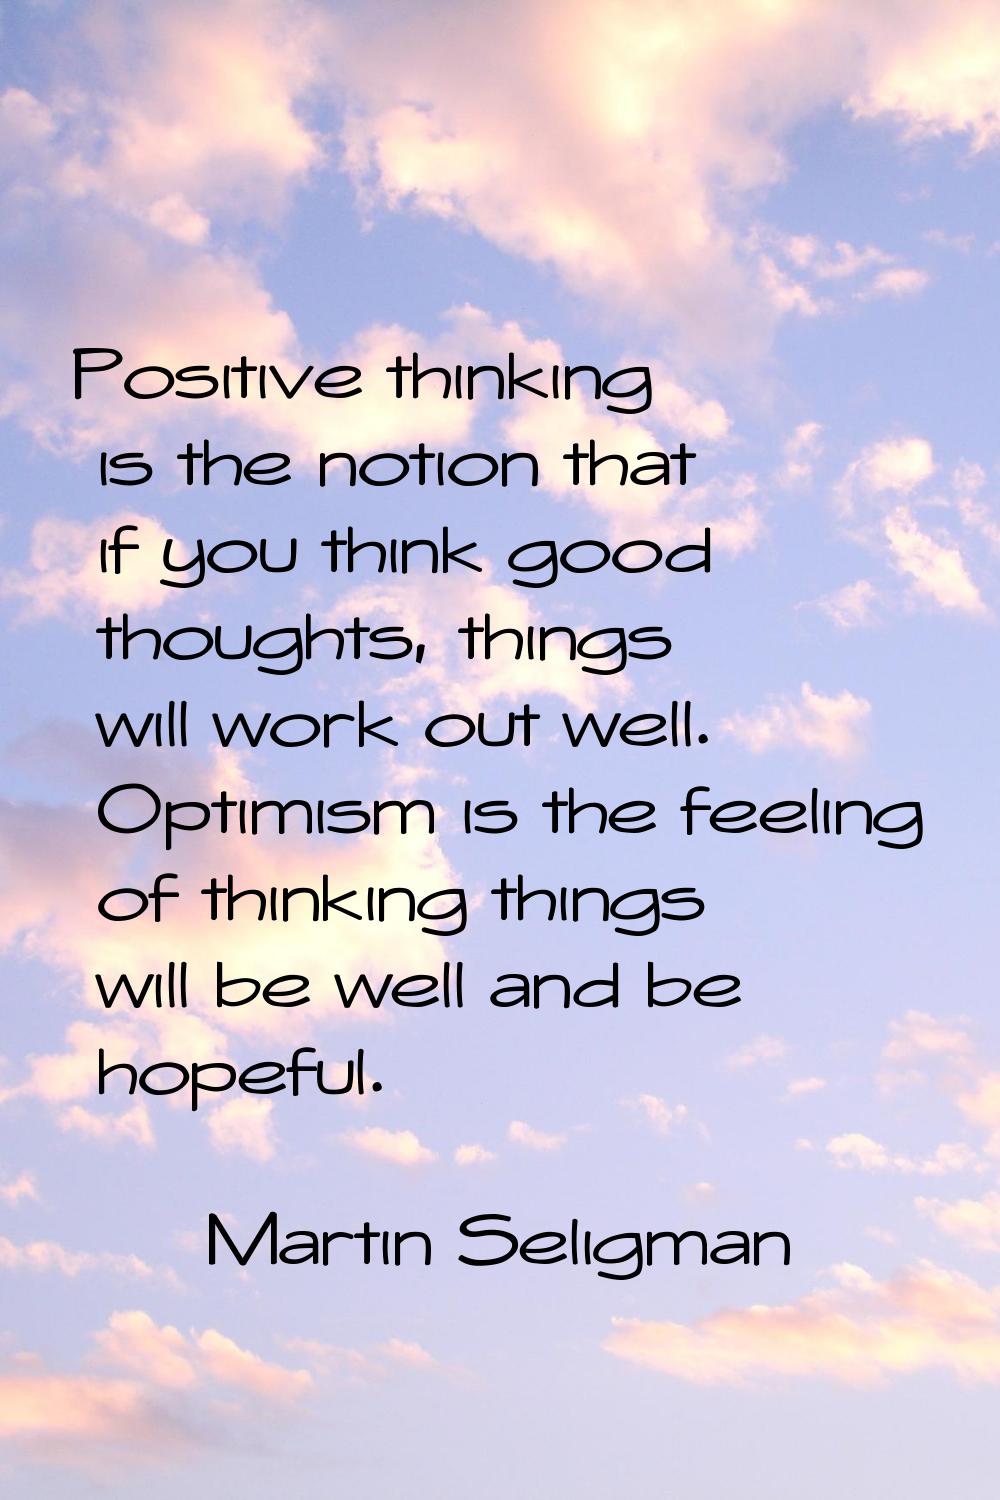 Positive thinking is the notion that if you think good thoughts, things will work out well. Optimis